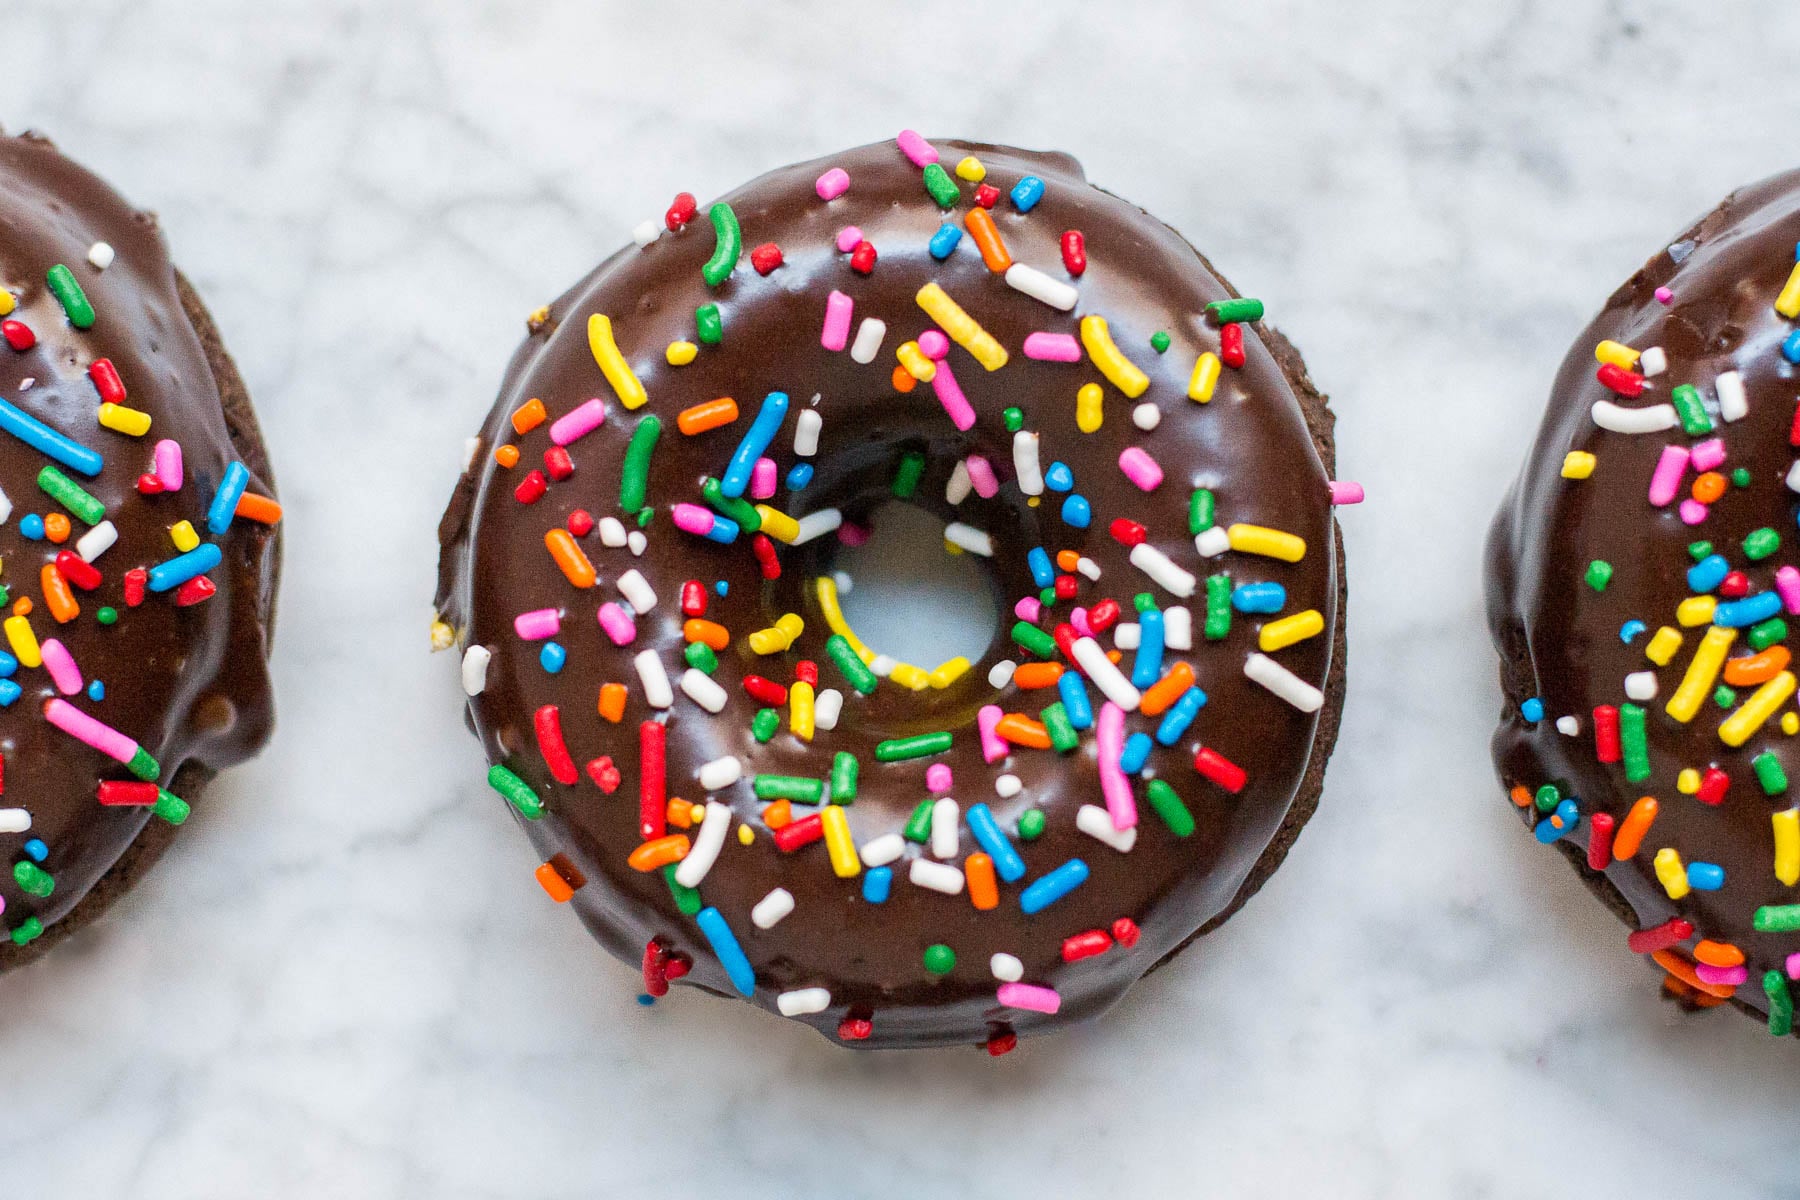 An aerial view of three gluten-free vegan baked chocolate donuts with chocolate glaze and rainbow sprinkles. 